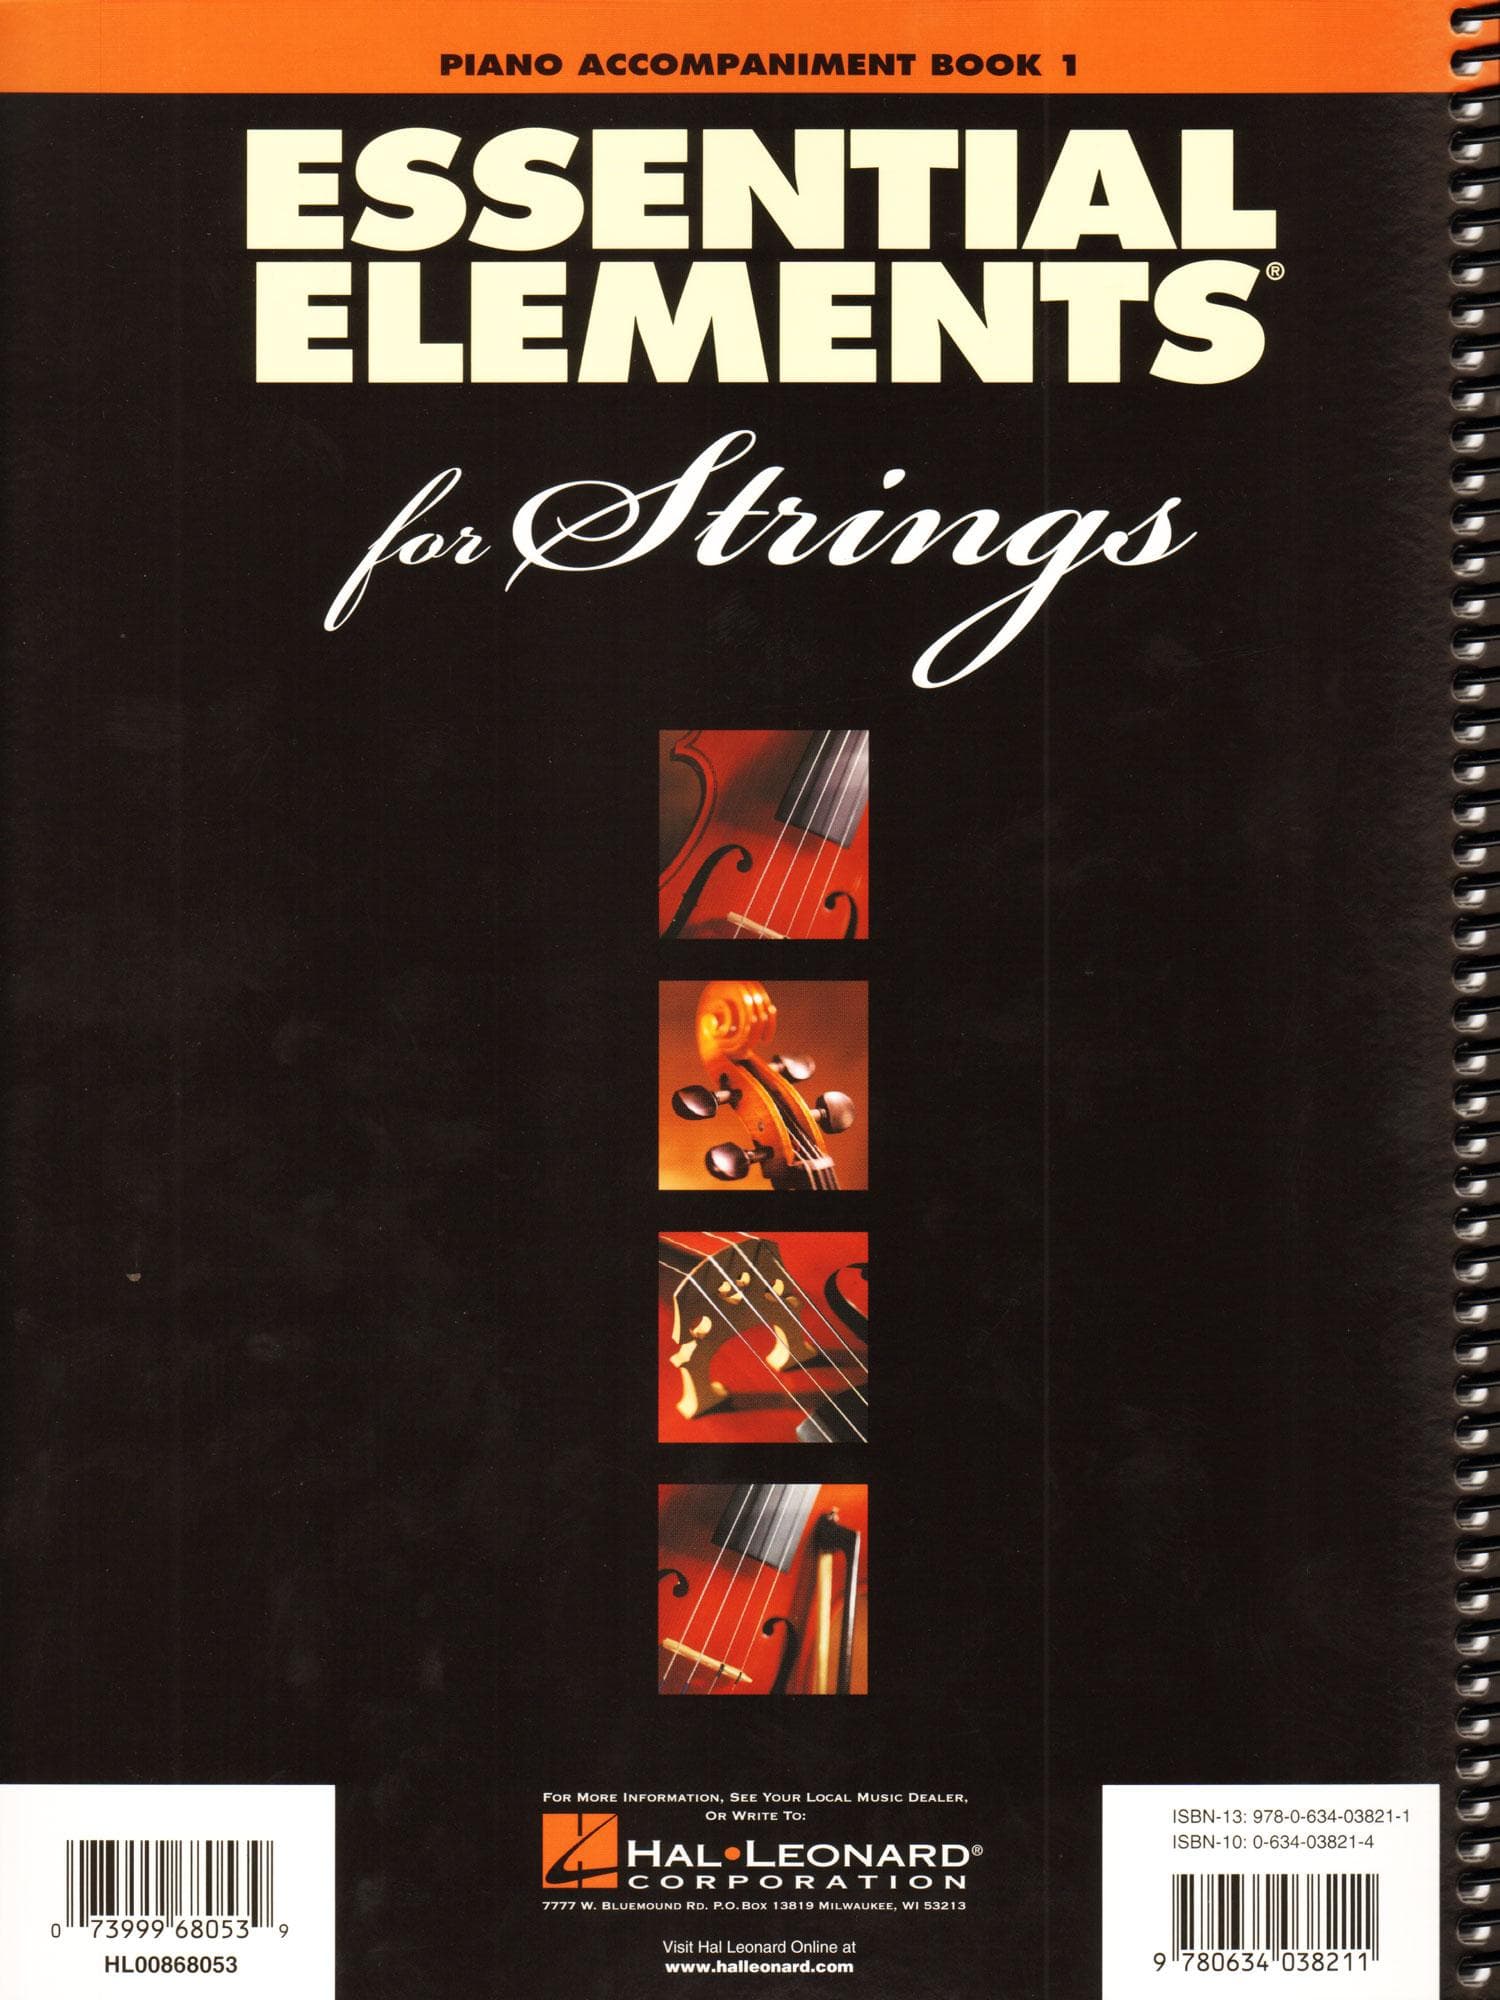 Essential Elements Interactive (formerly 2000) for Strings - Piano Accompaniment Book 1 - by Allen/Gillespie/Hayes - Hal Leonard Publication